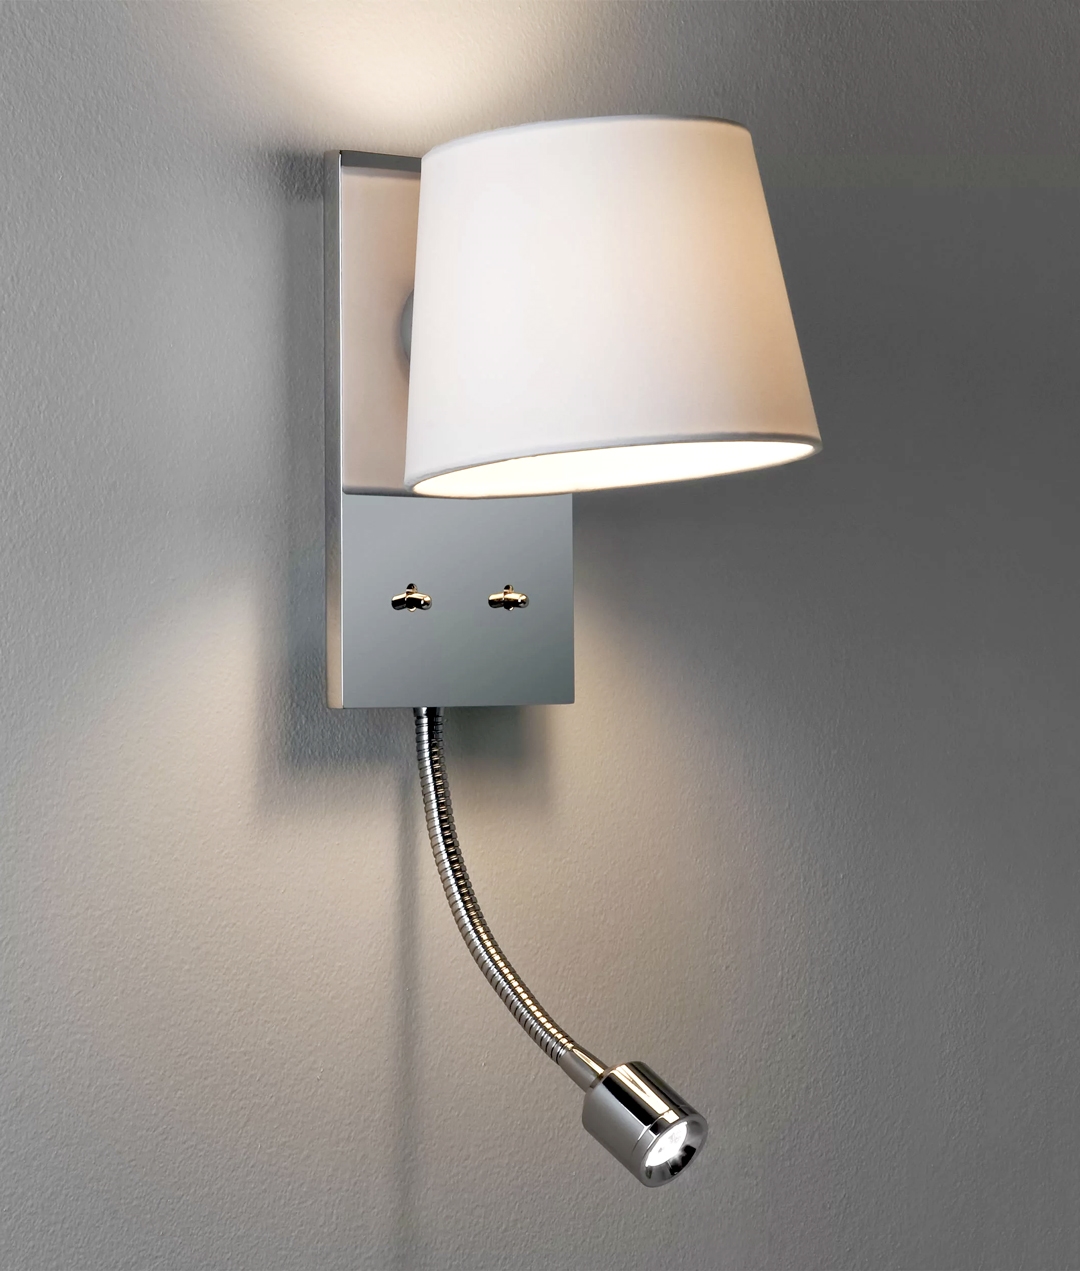 Dual purpose bedside wall light with adjustable LED reading lamp